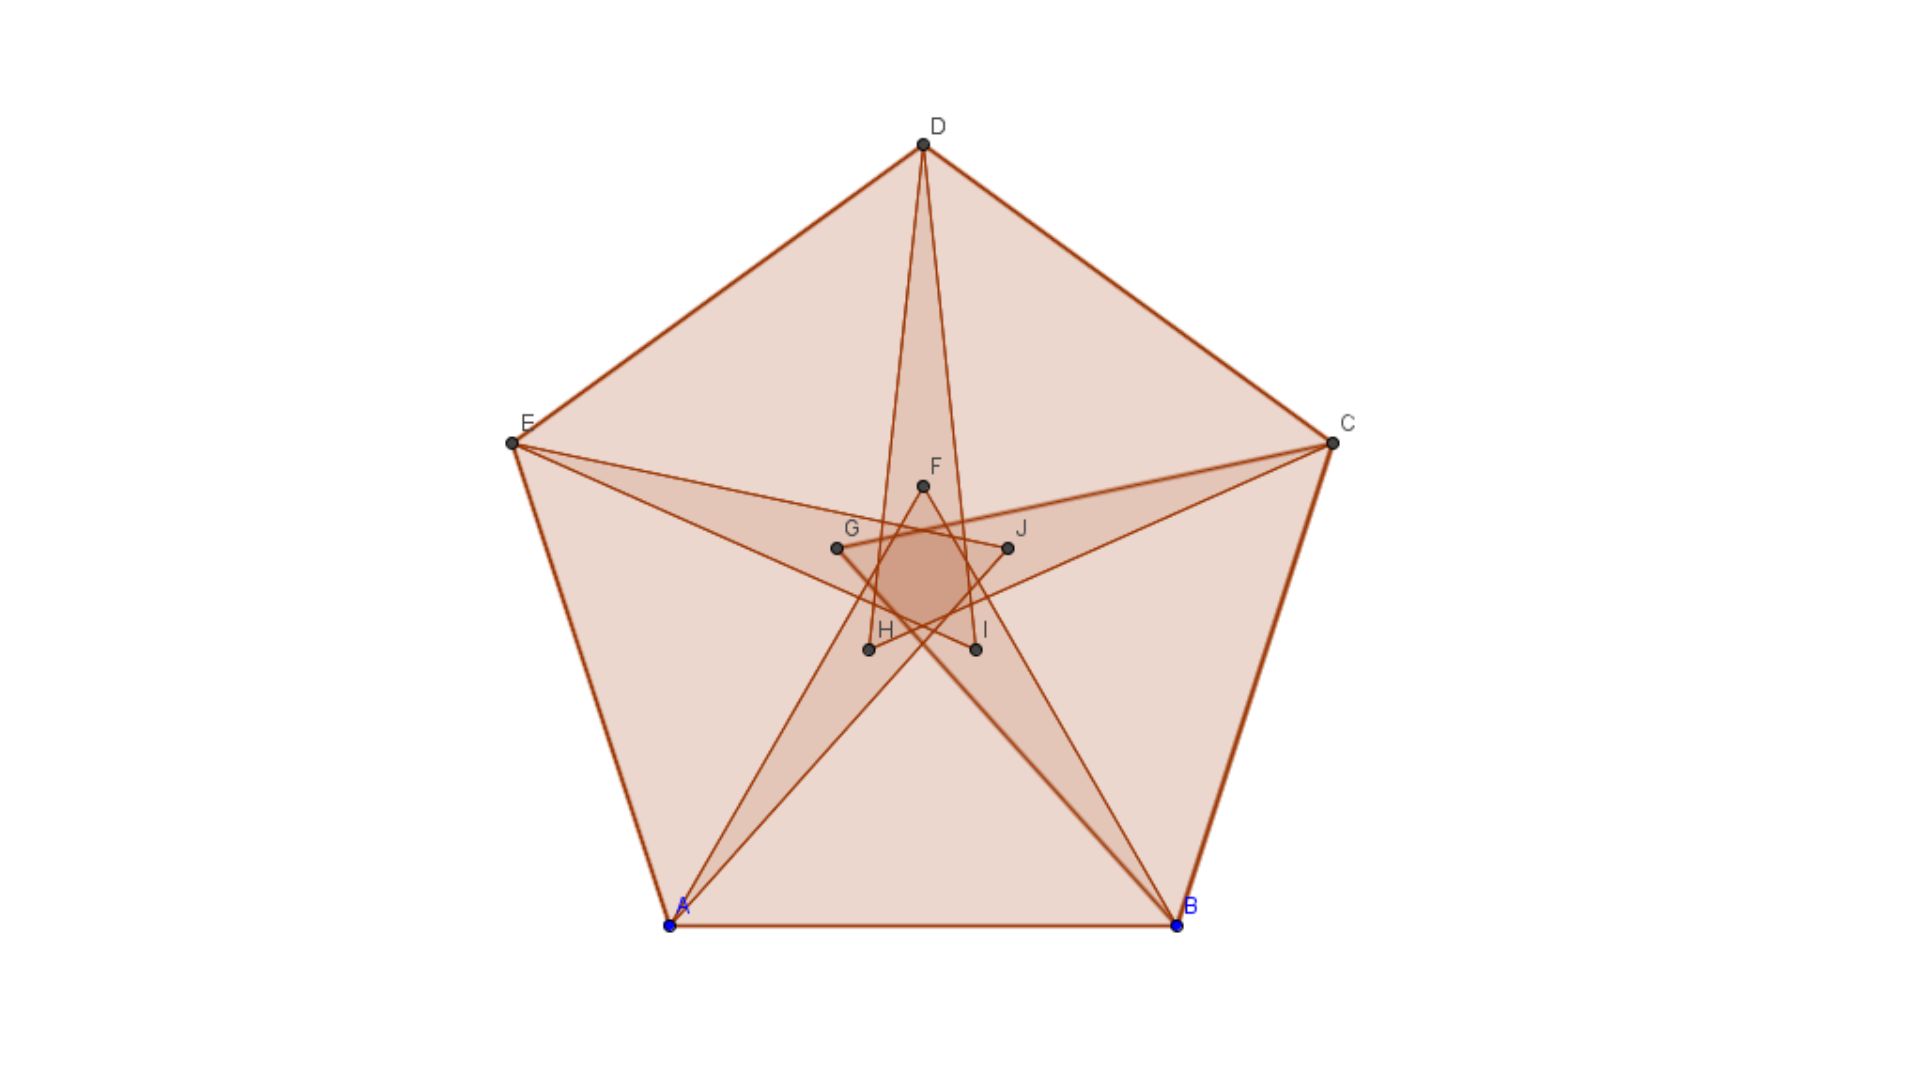 Simple pentagon be constructed from five equilateral triangles